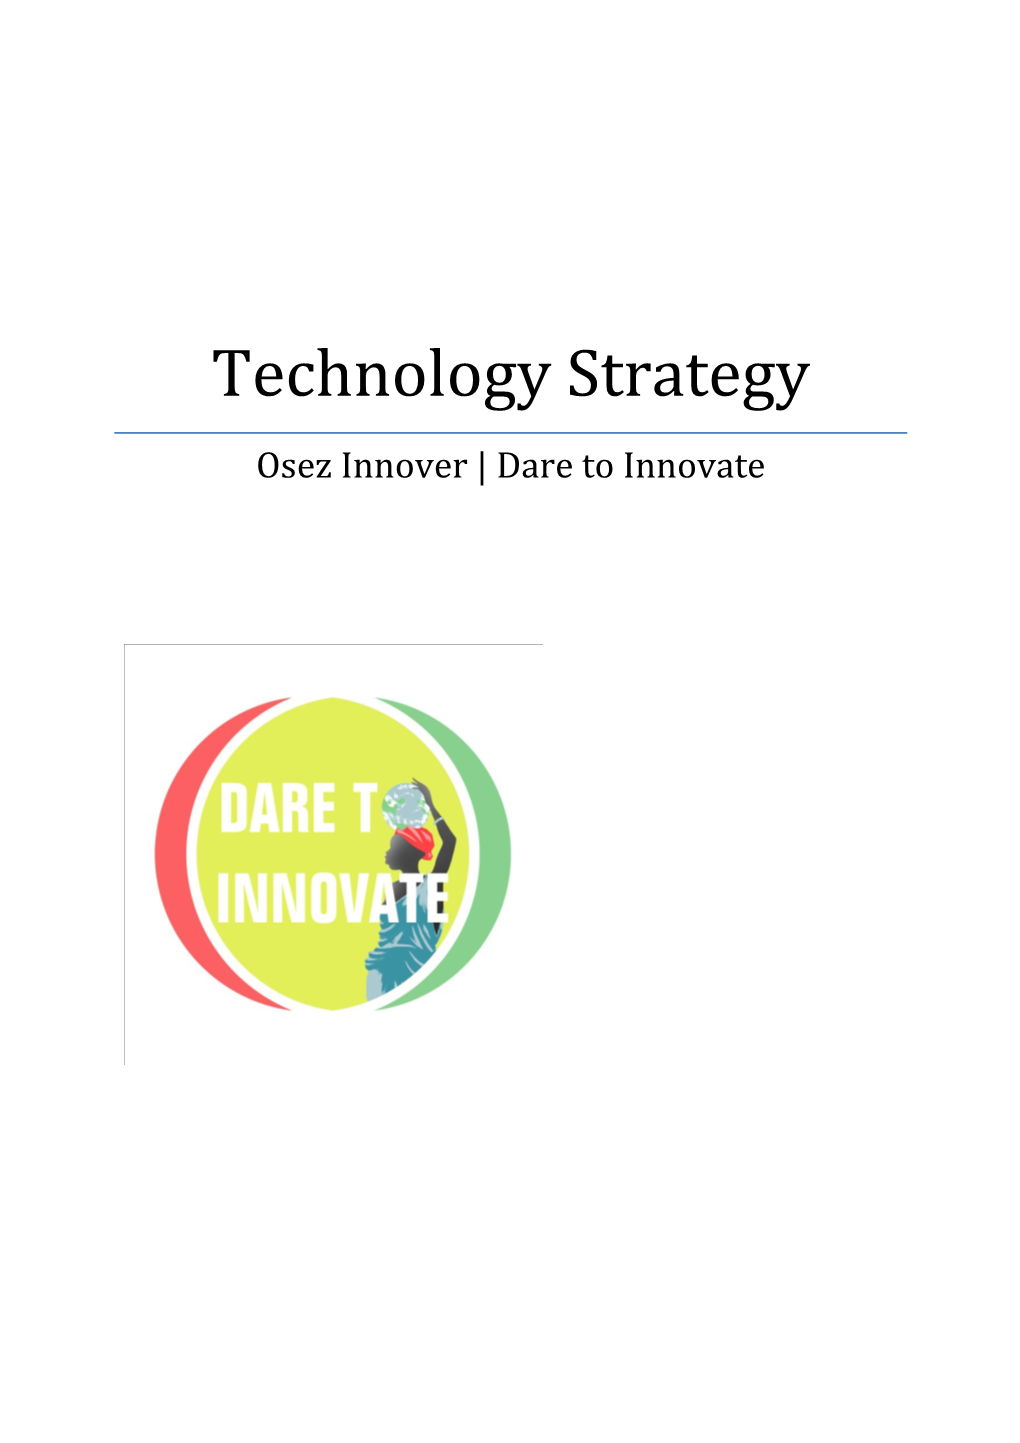 Osez Innover Dare to Innovate Technology Strategy 1.1